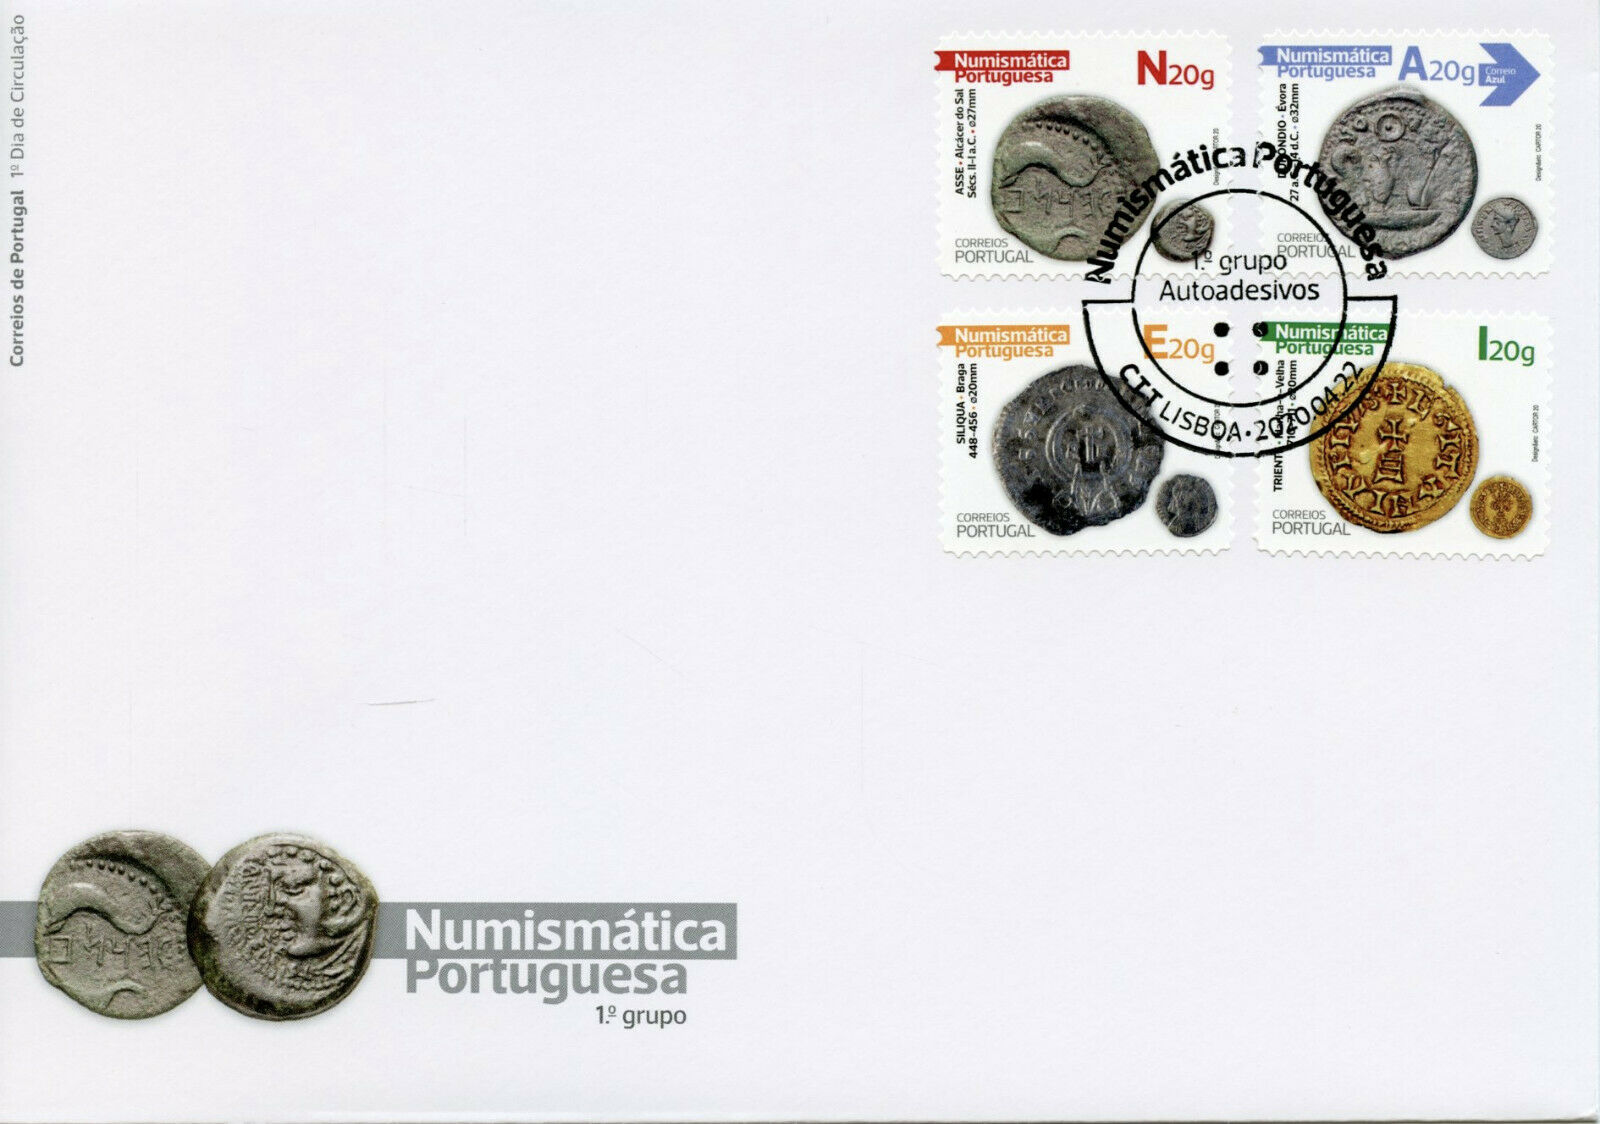 Portugal Coins on Stamps 2020 FDC Numismatics Part I Archaeology 4v S/A Set